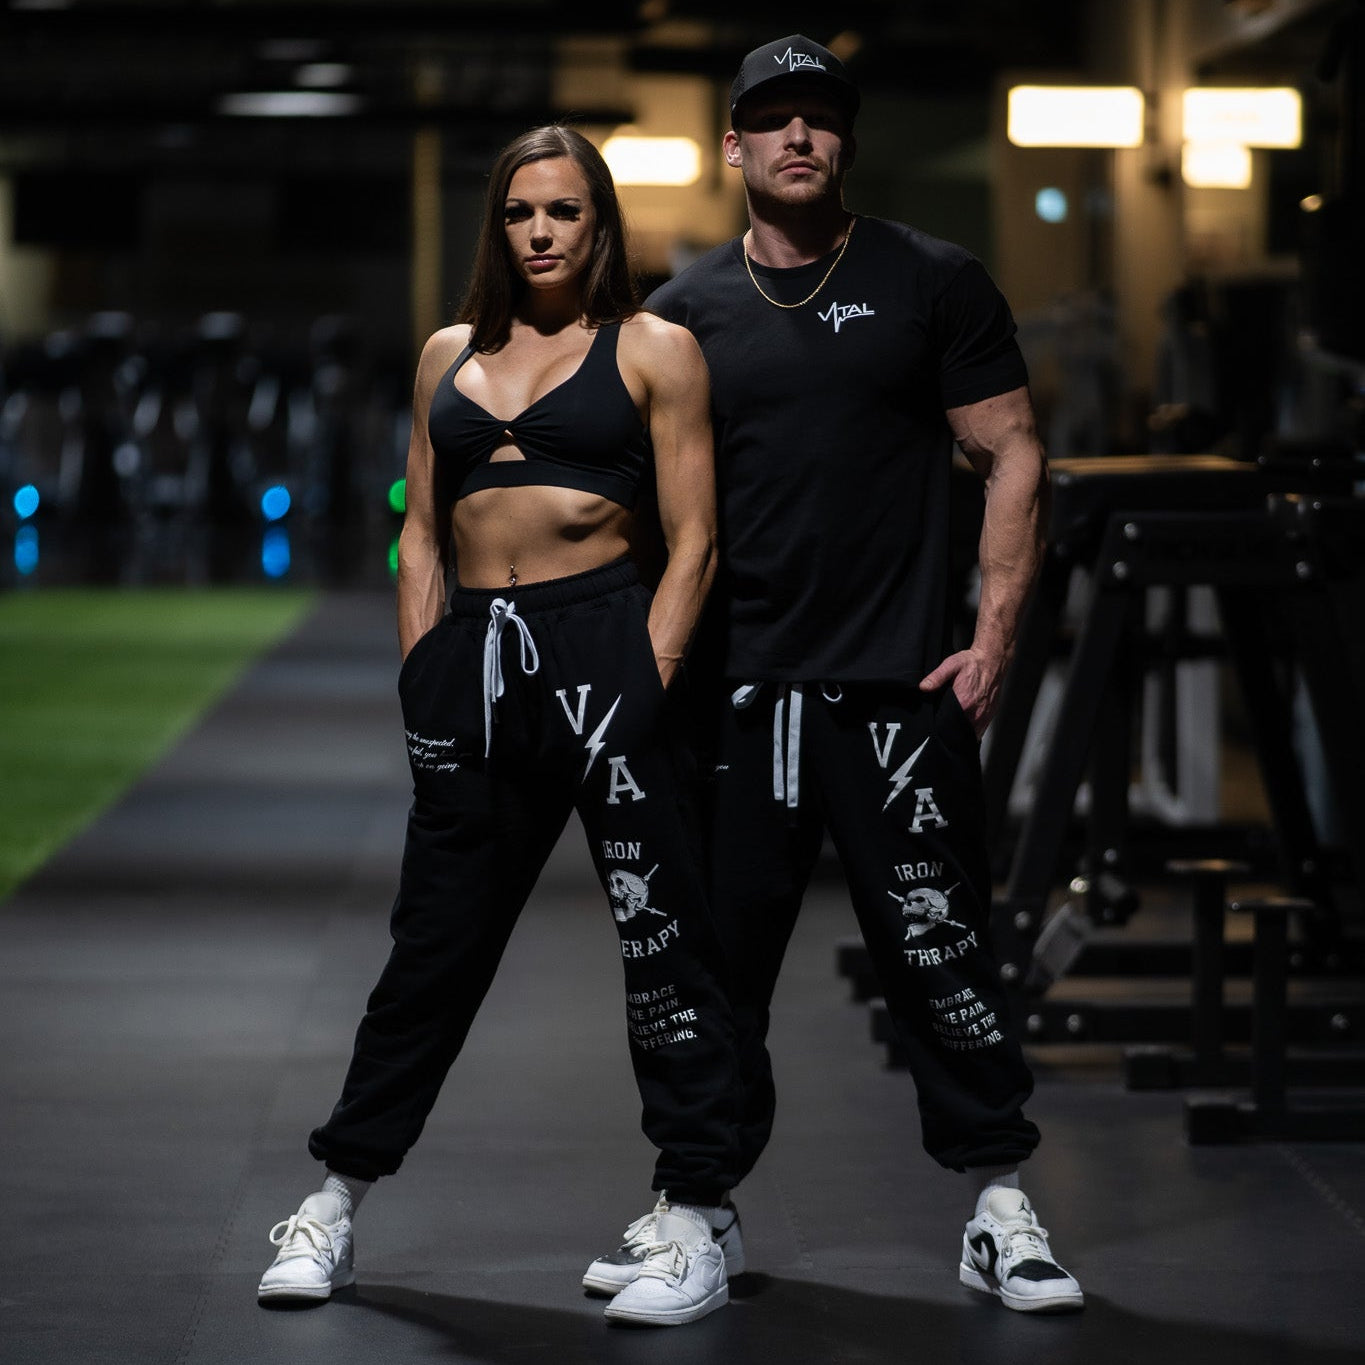 Vital Apparel - Activewear Designed For a Cause -Mental Health